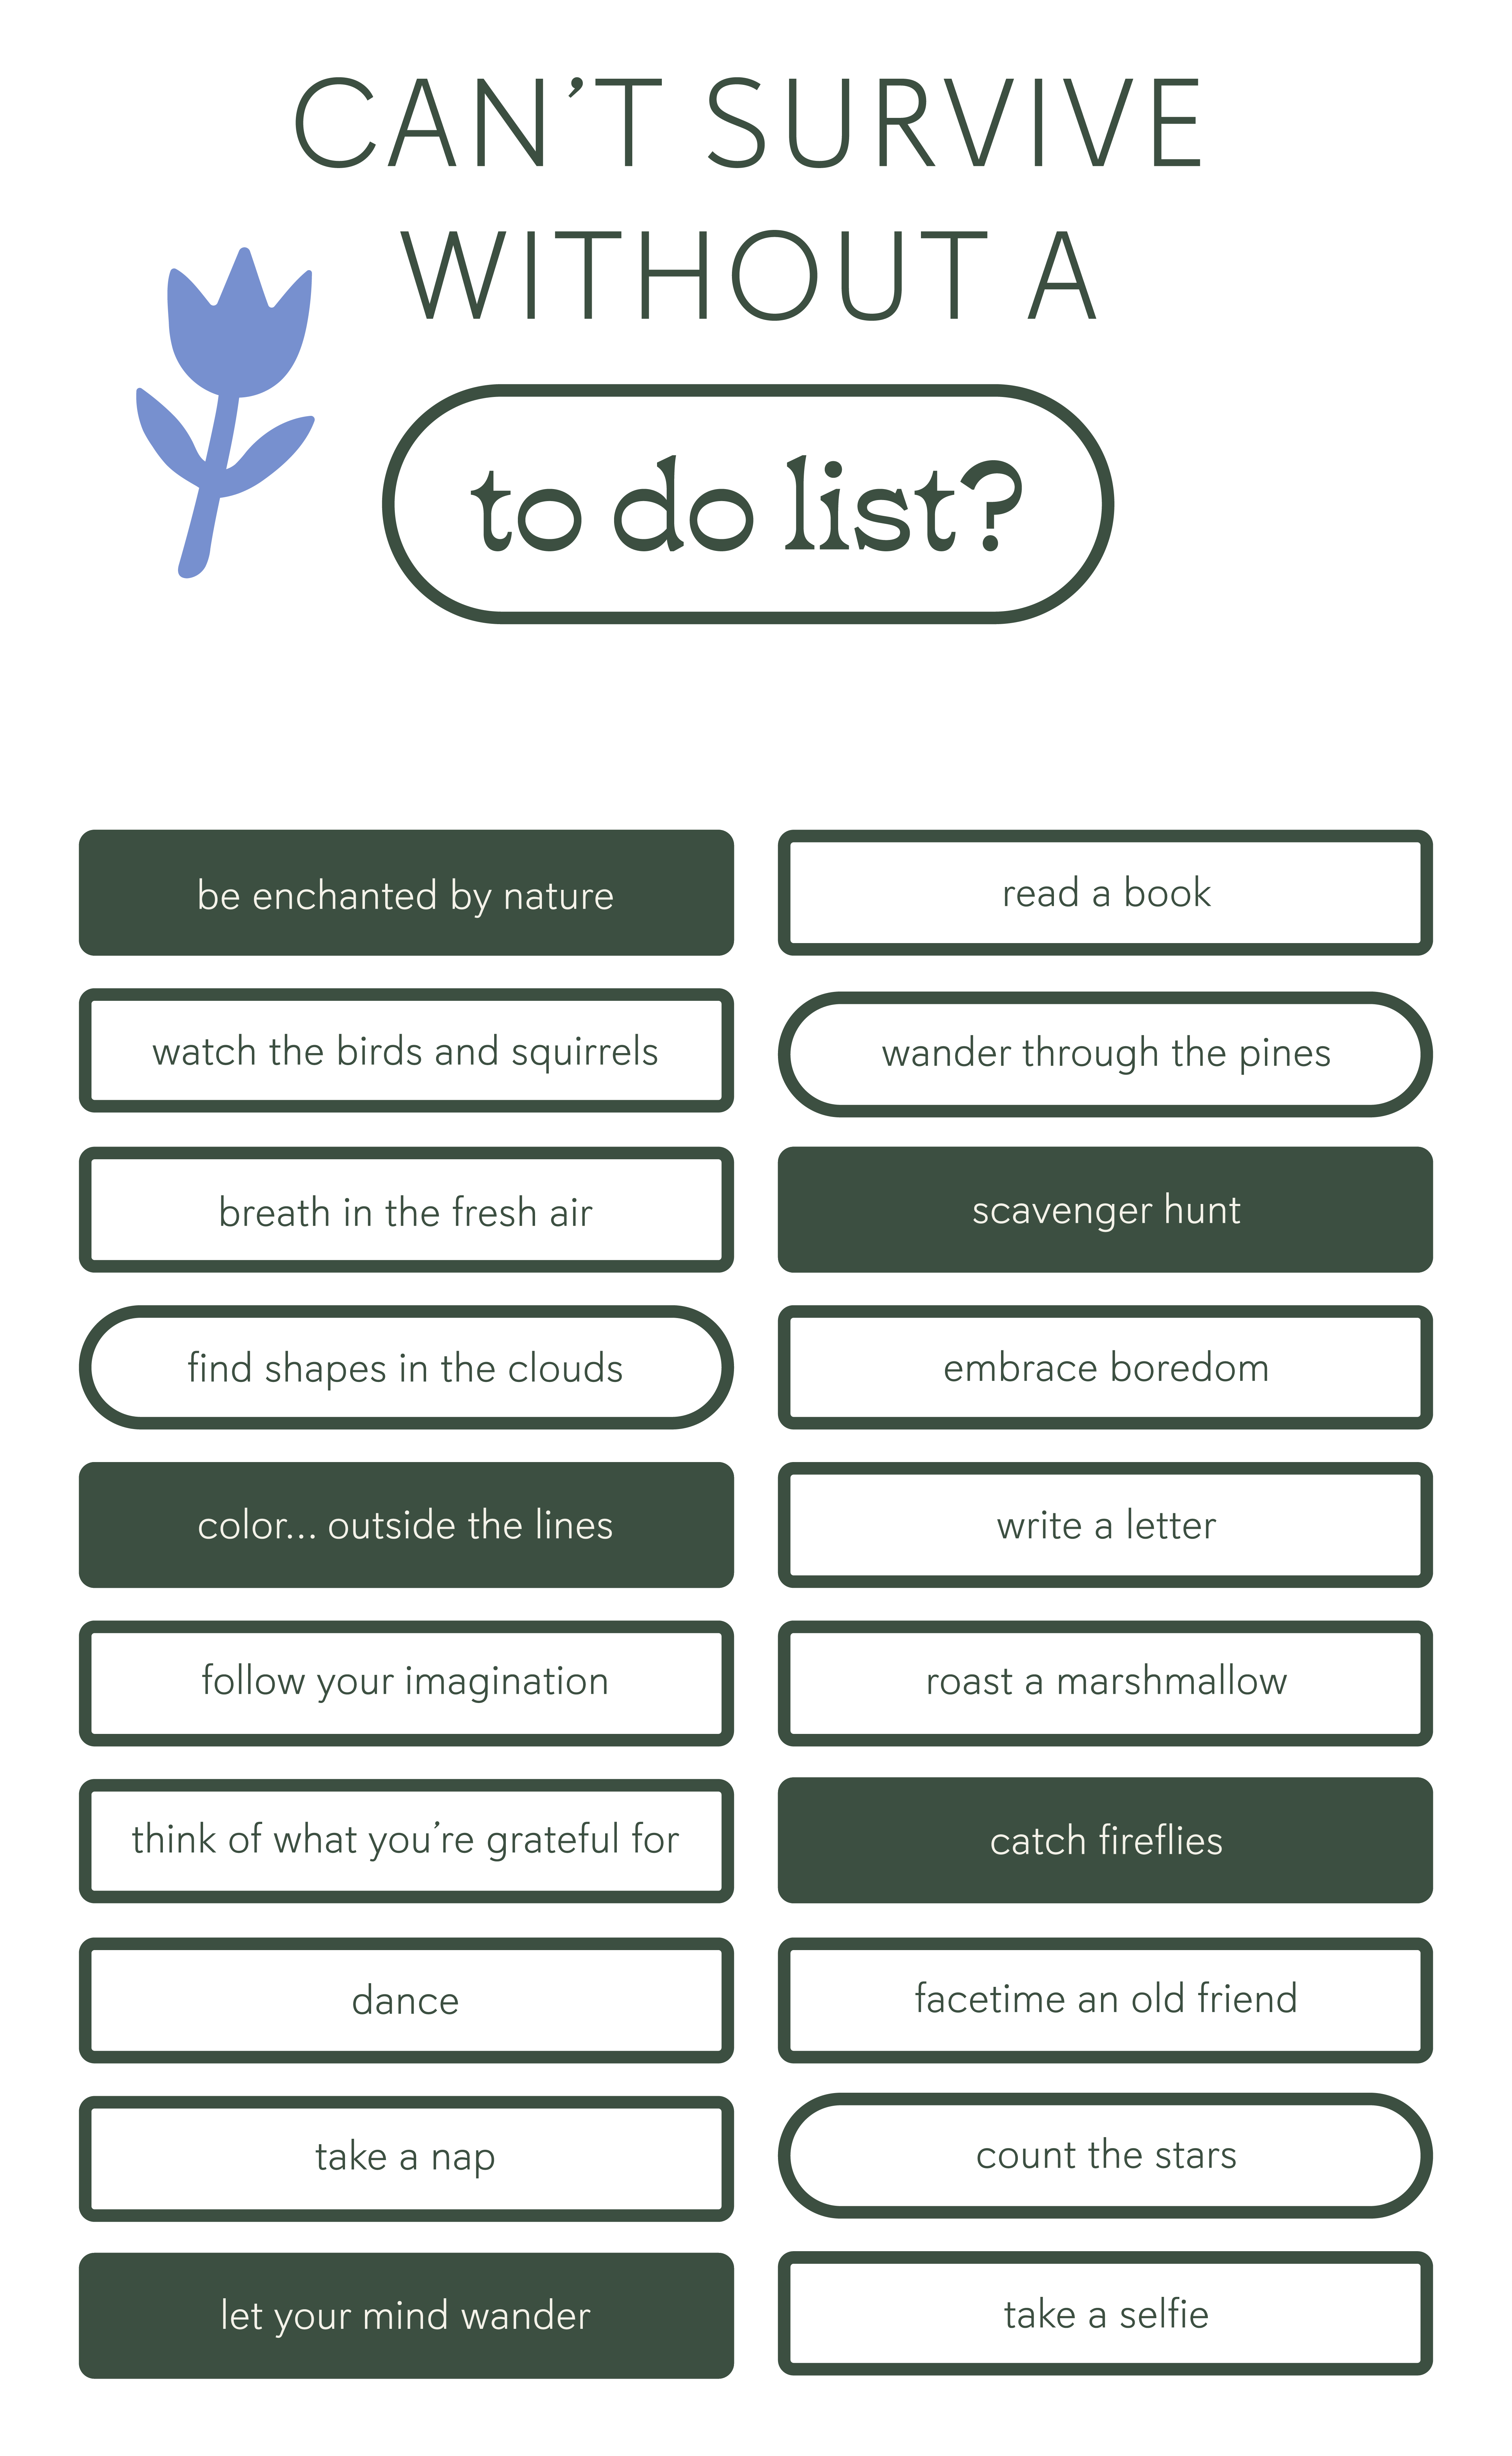 Can't survive without a todo list?